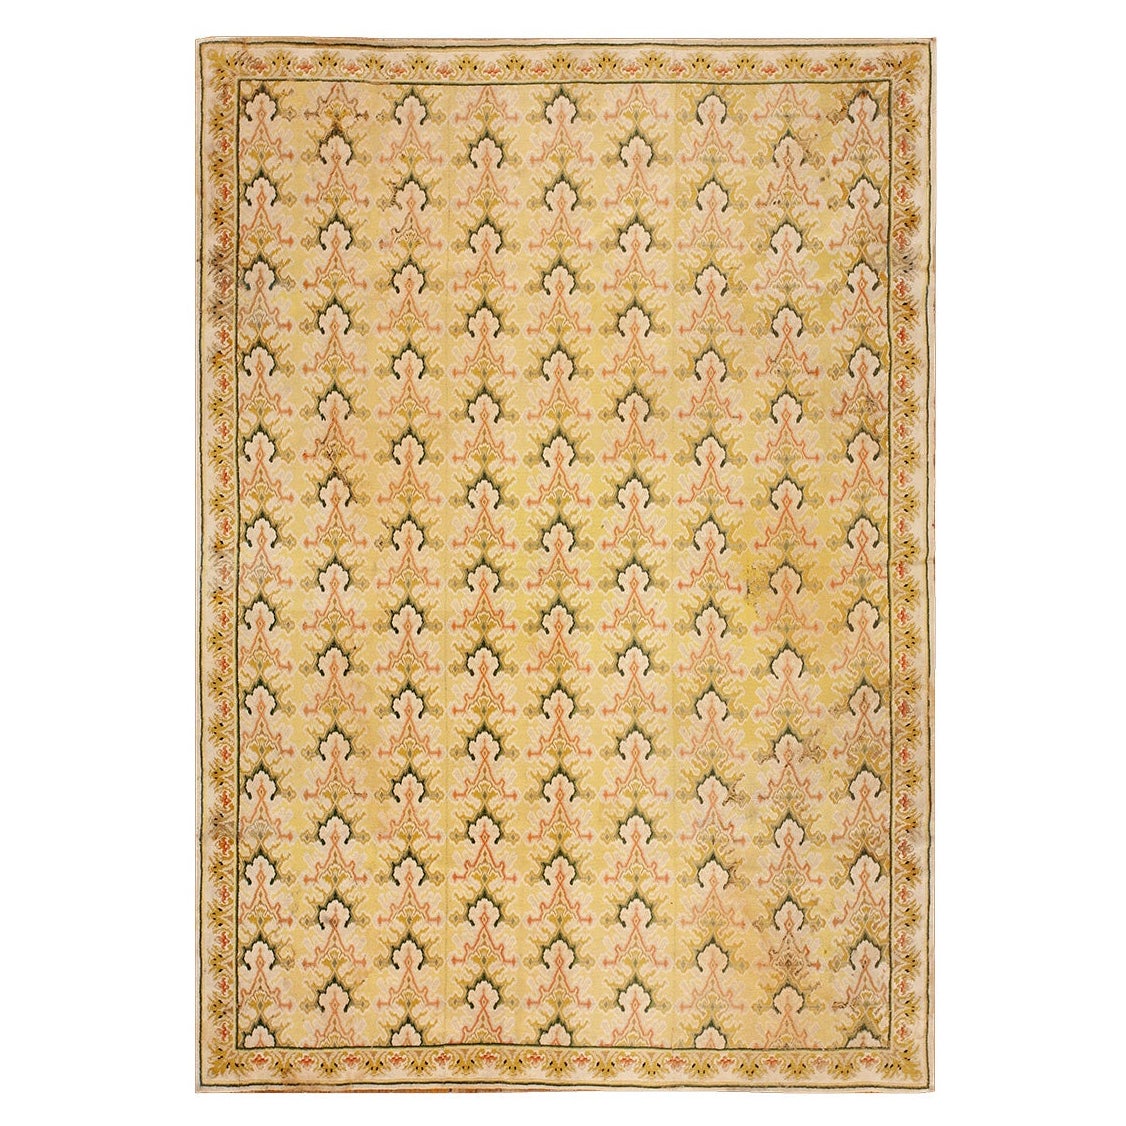 19th Century French Needlepoint Carpet ( 8' x 10'2" - 244 x 310 ) For Sale